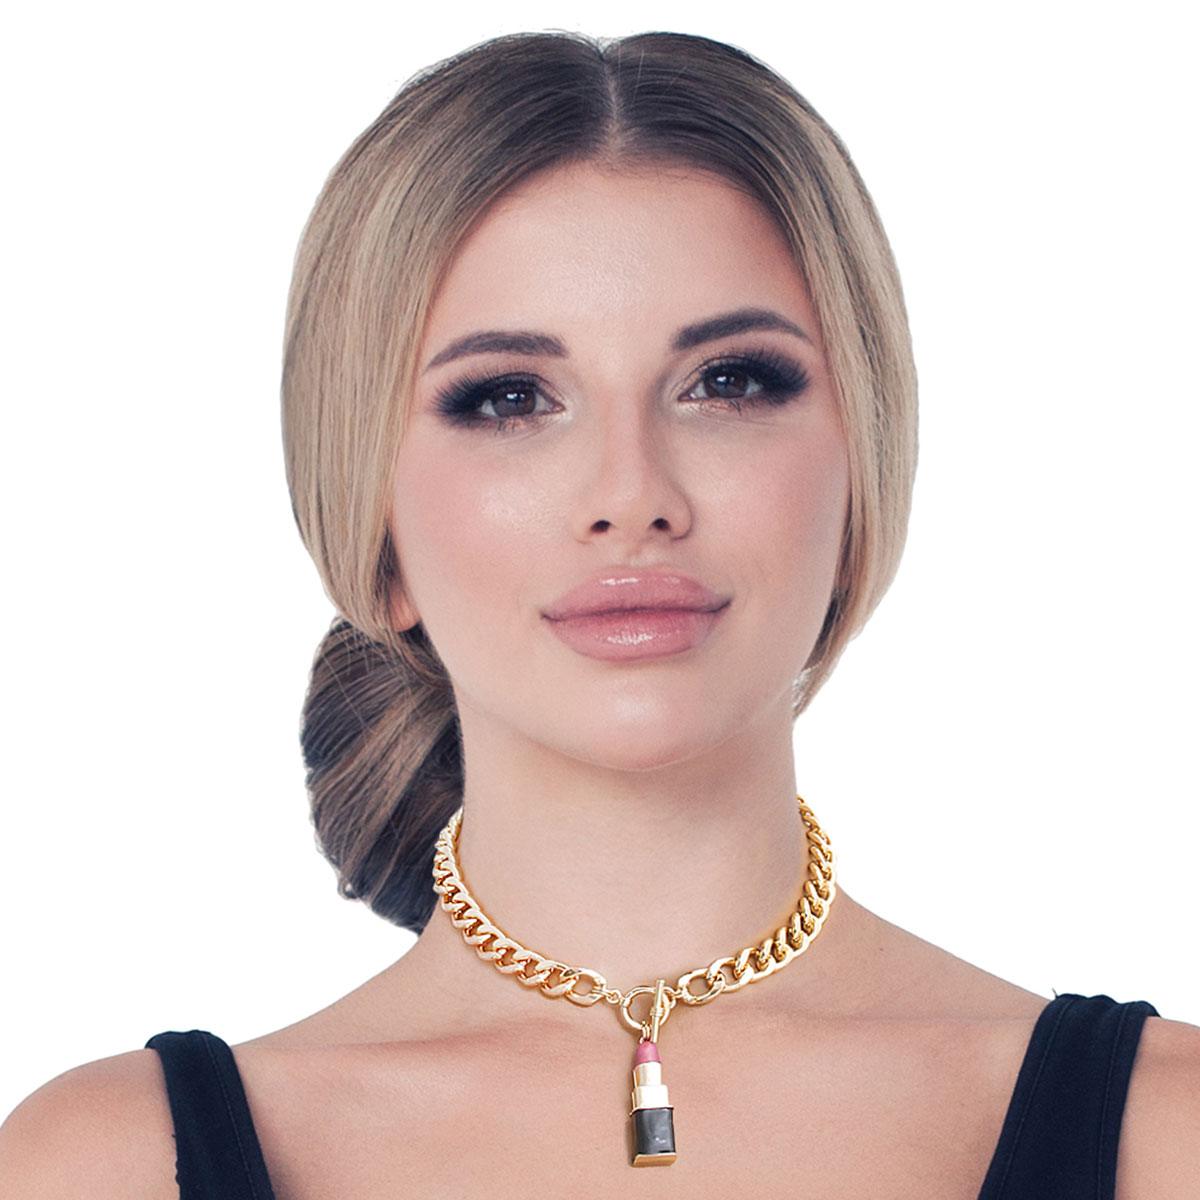 Get the Perfect Pink Lipstick Look with Our Gold Tone Chain Necklace